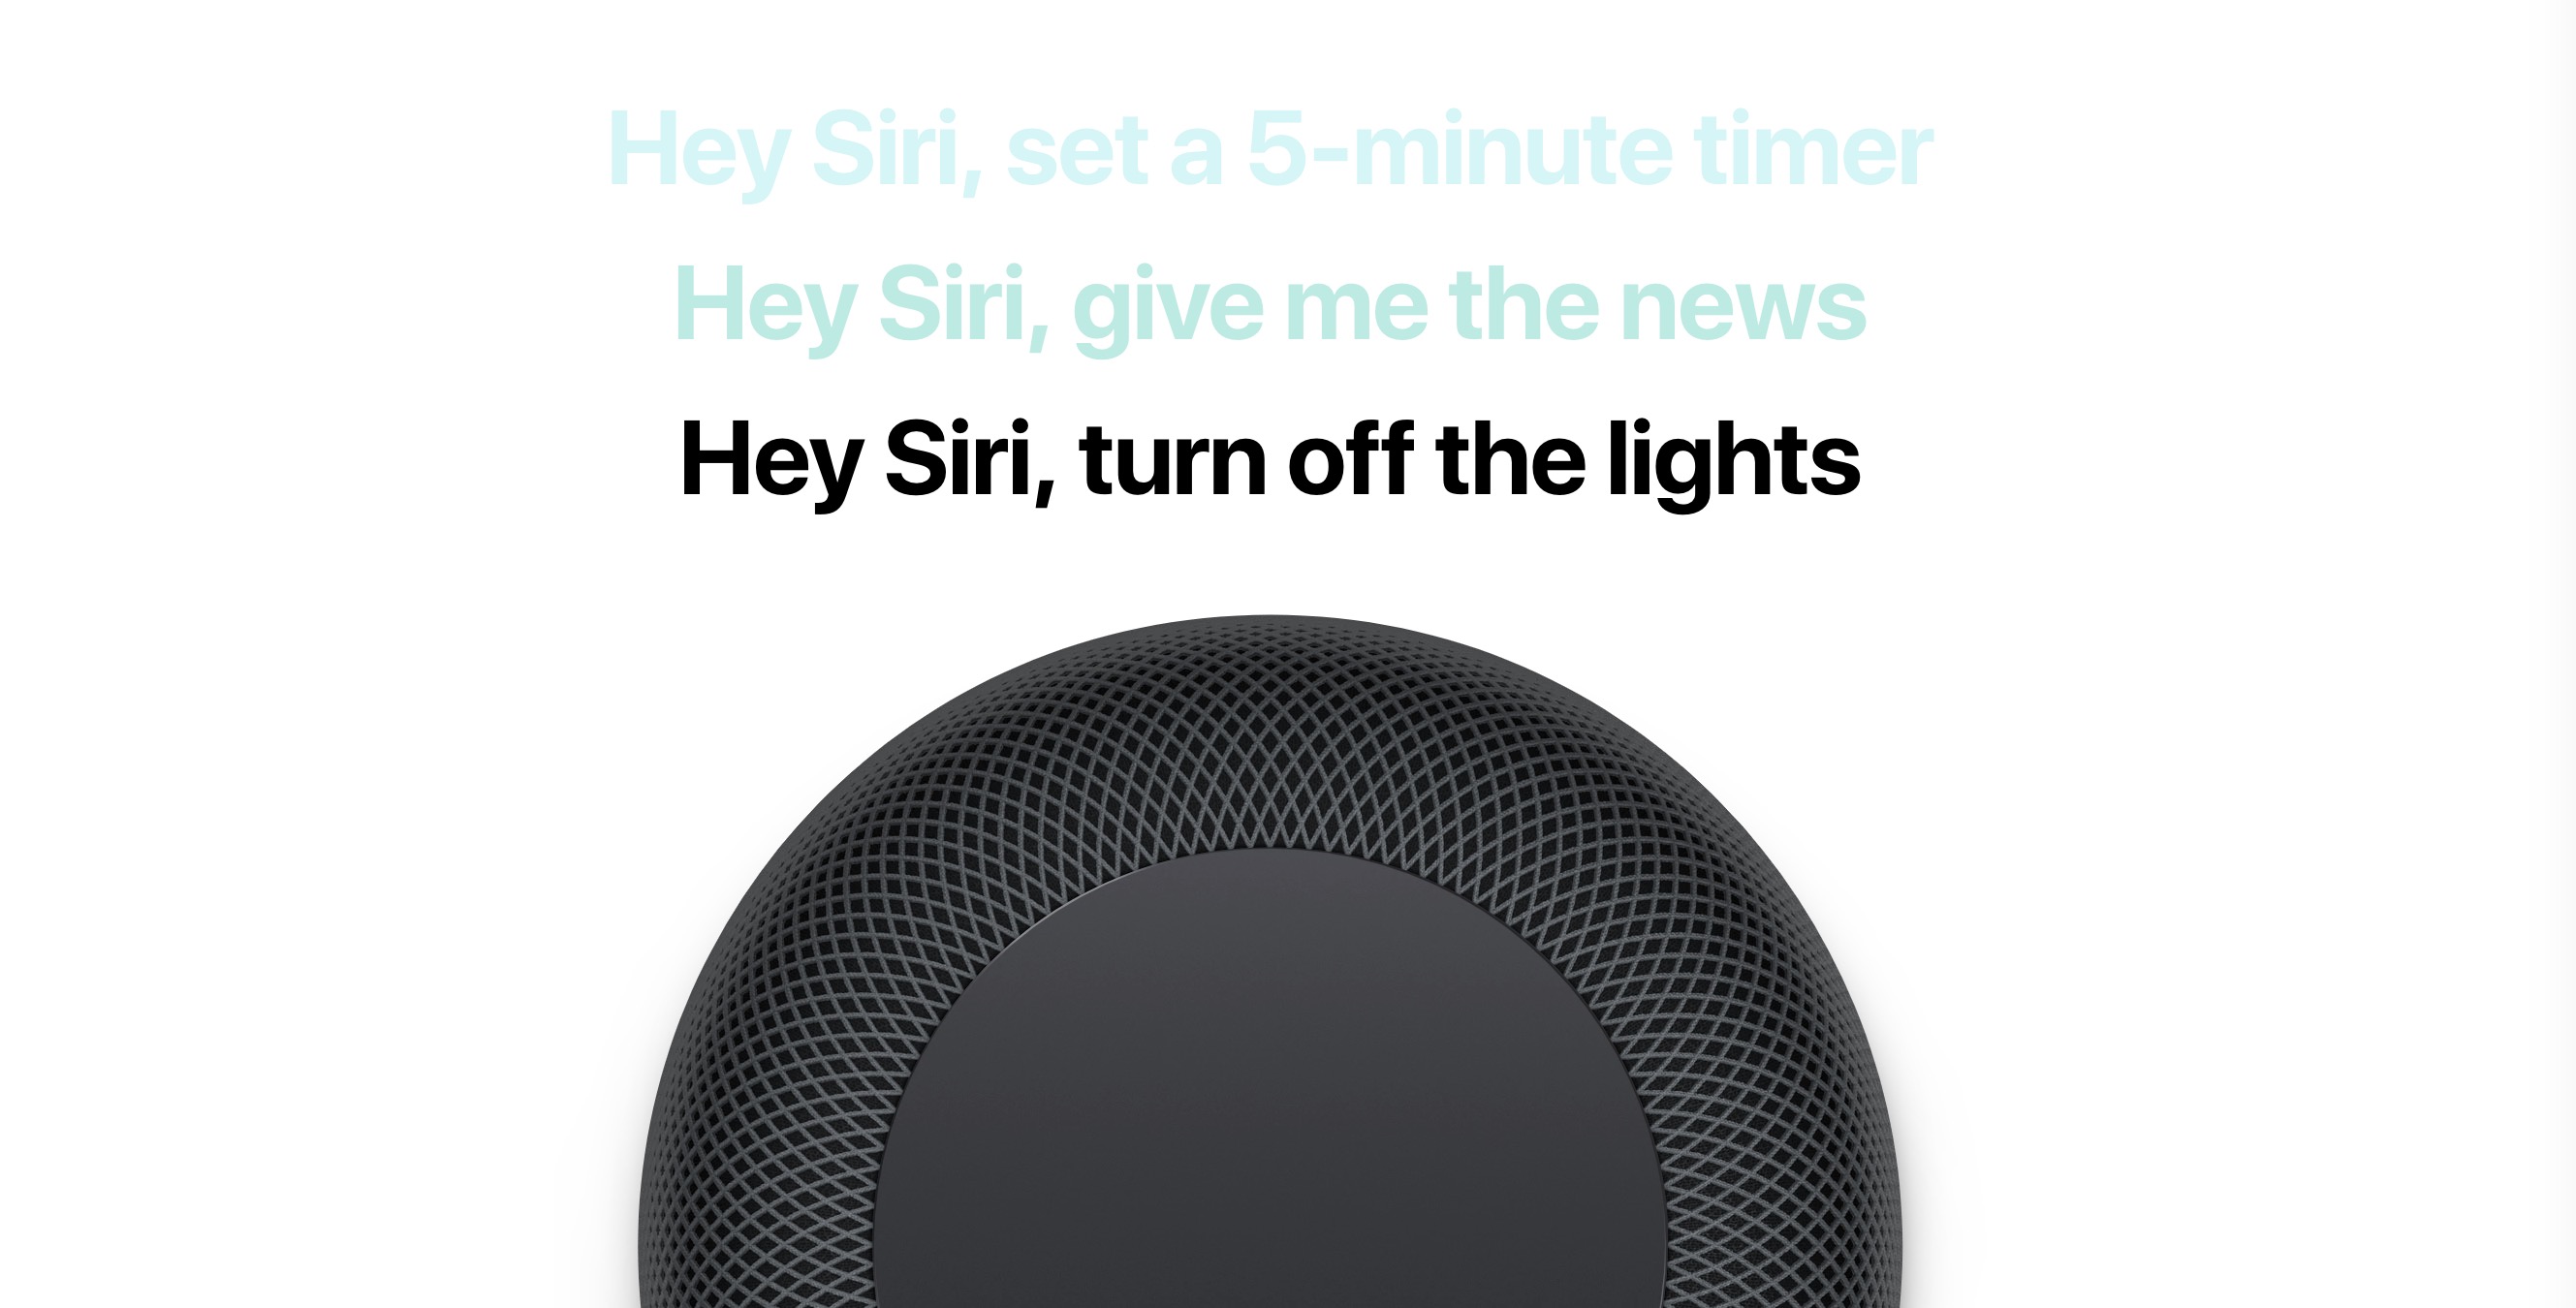 Apple Adds A Siri-powered News Briefing to The Latest iOS Beta